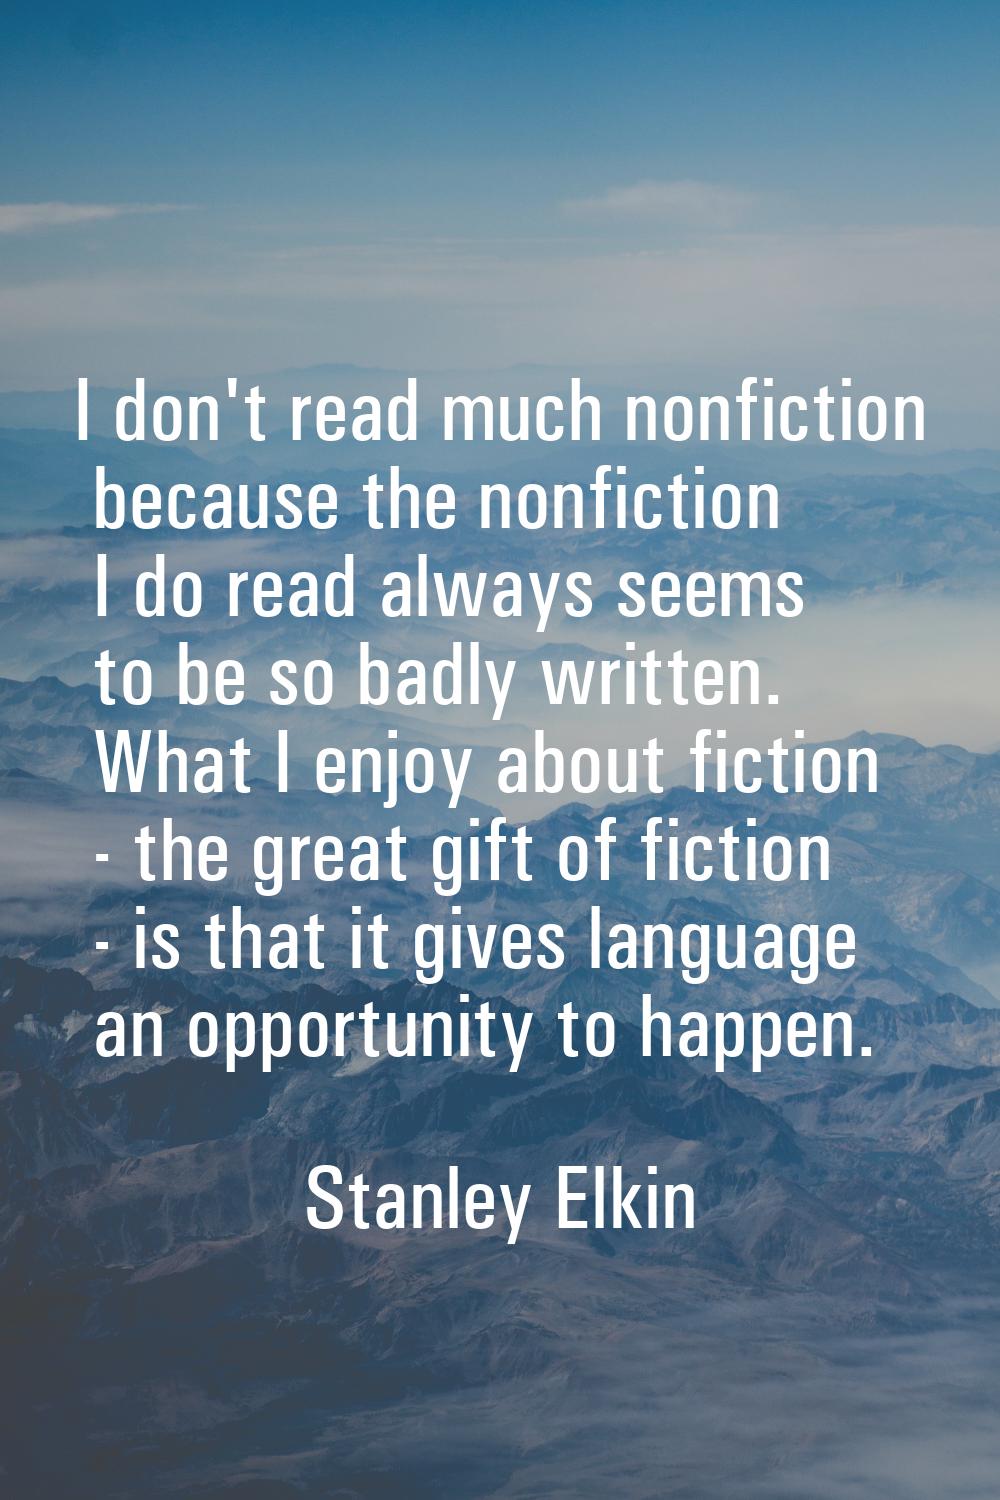 I don't read much nonfiction because the nonfiction I do read always seems to be so badly written. 